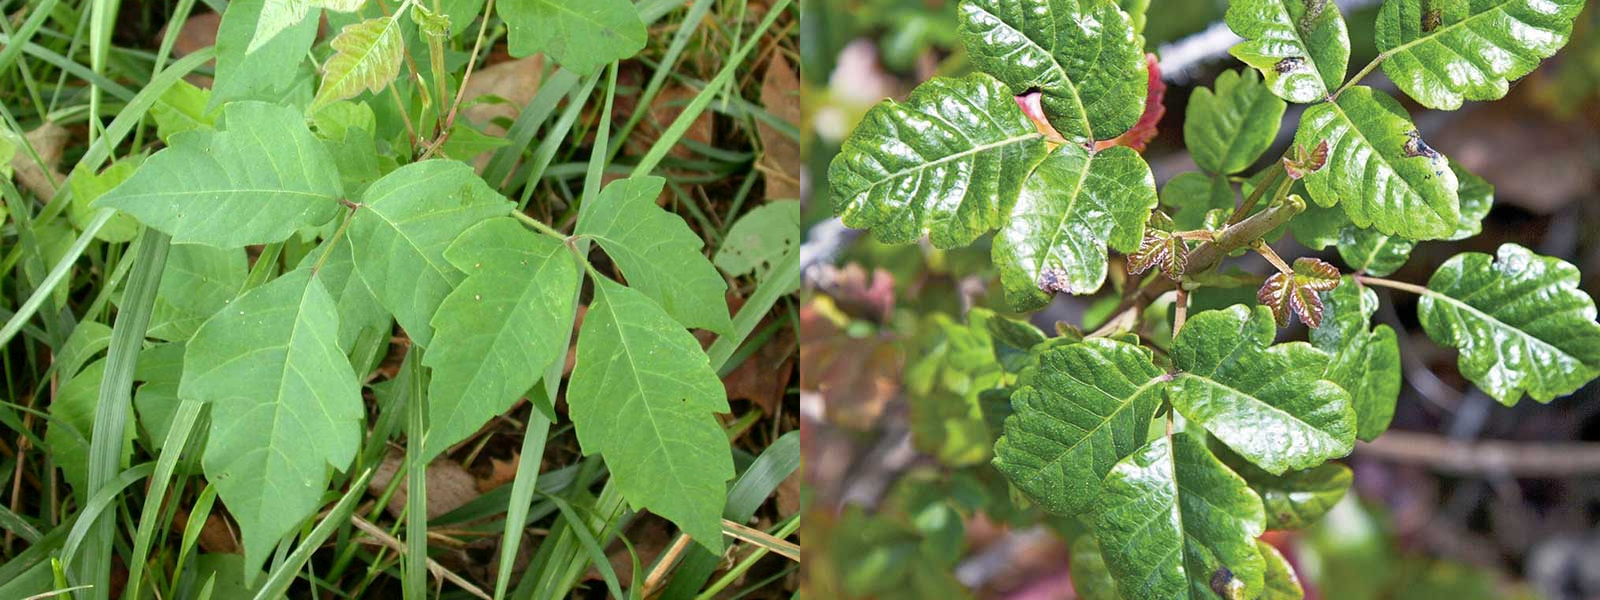 Poison ivy leaves compared to poison oak leaves